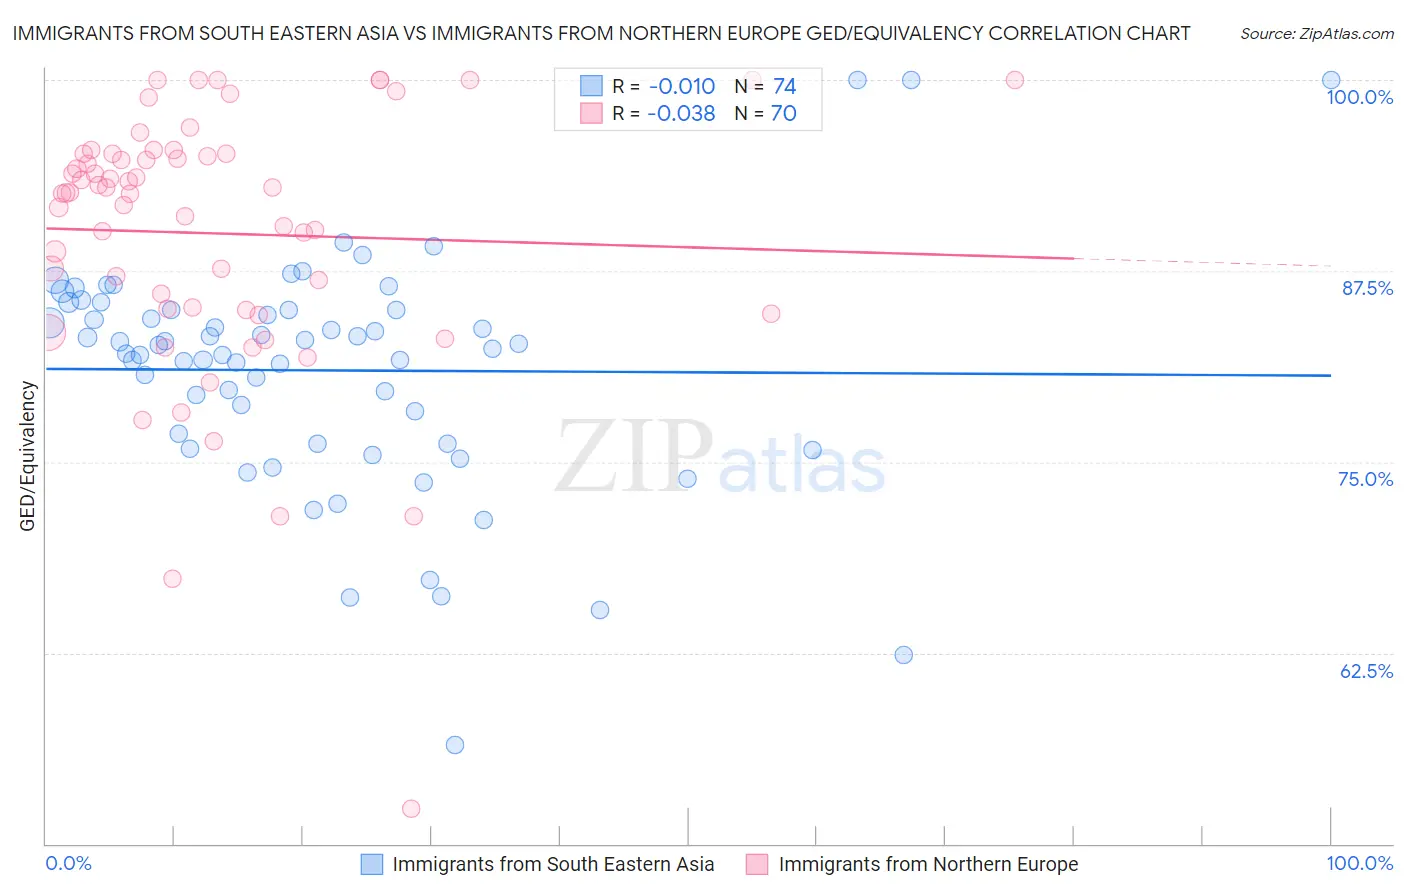 Immigrants from South Eastern Asia vs Immigrants from Northern Europe GED/Equivalency